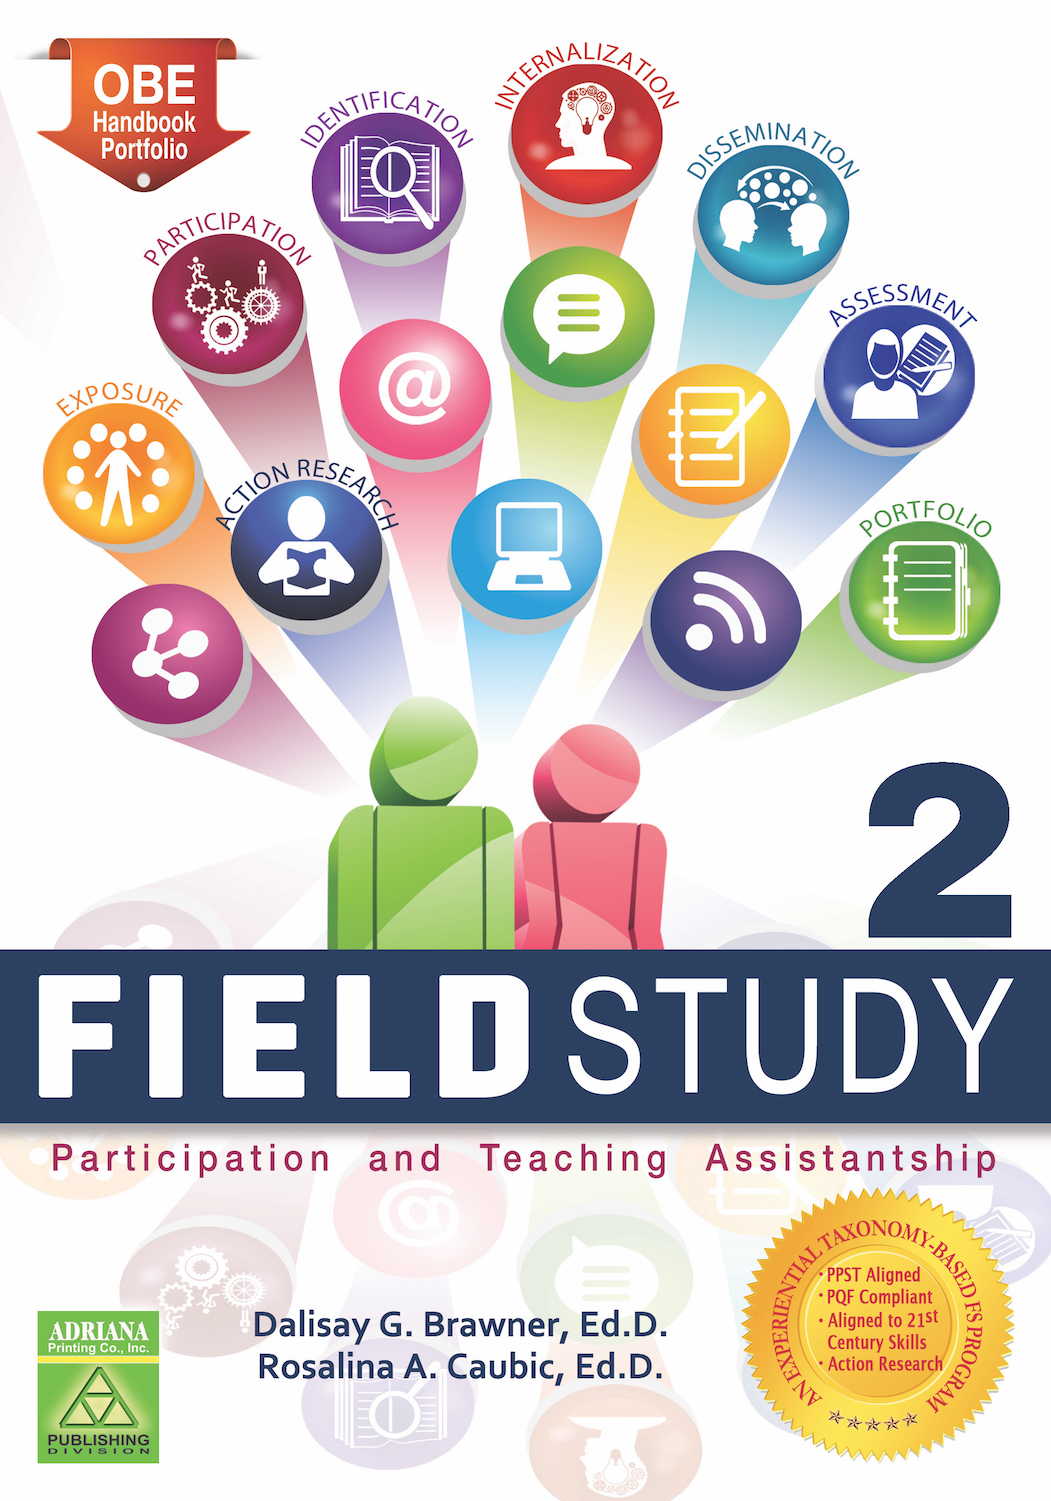 action research in field study 2